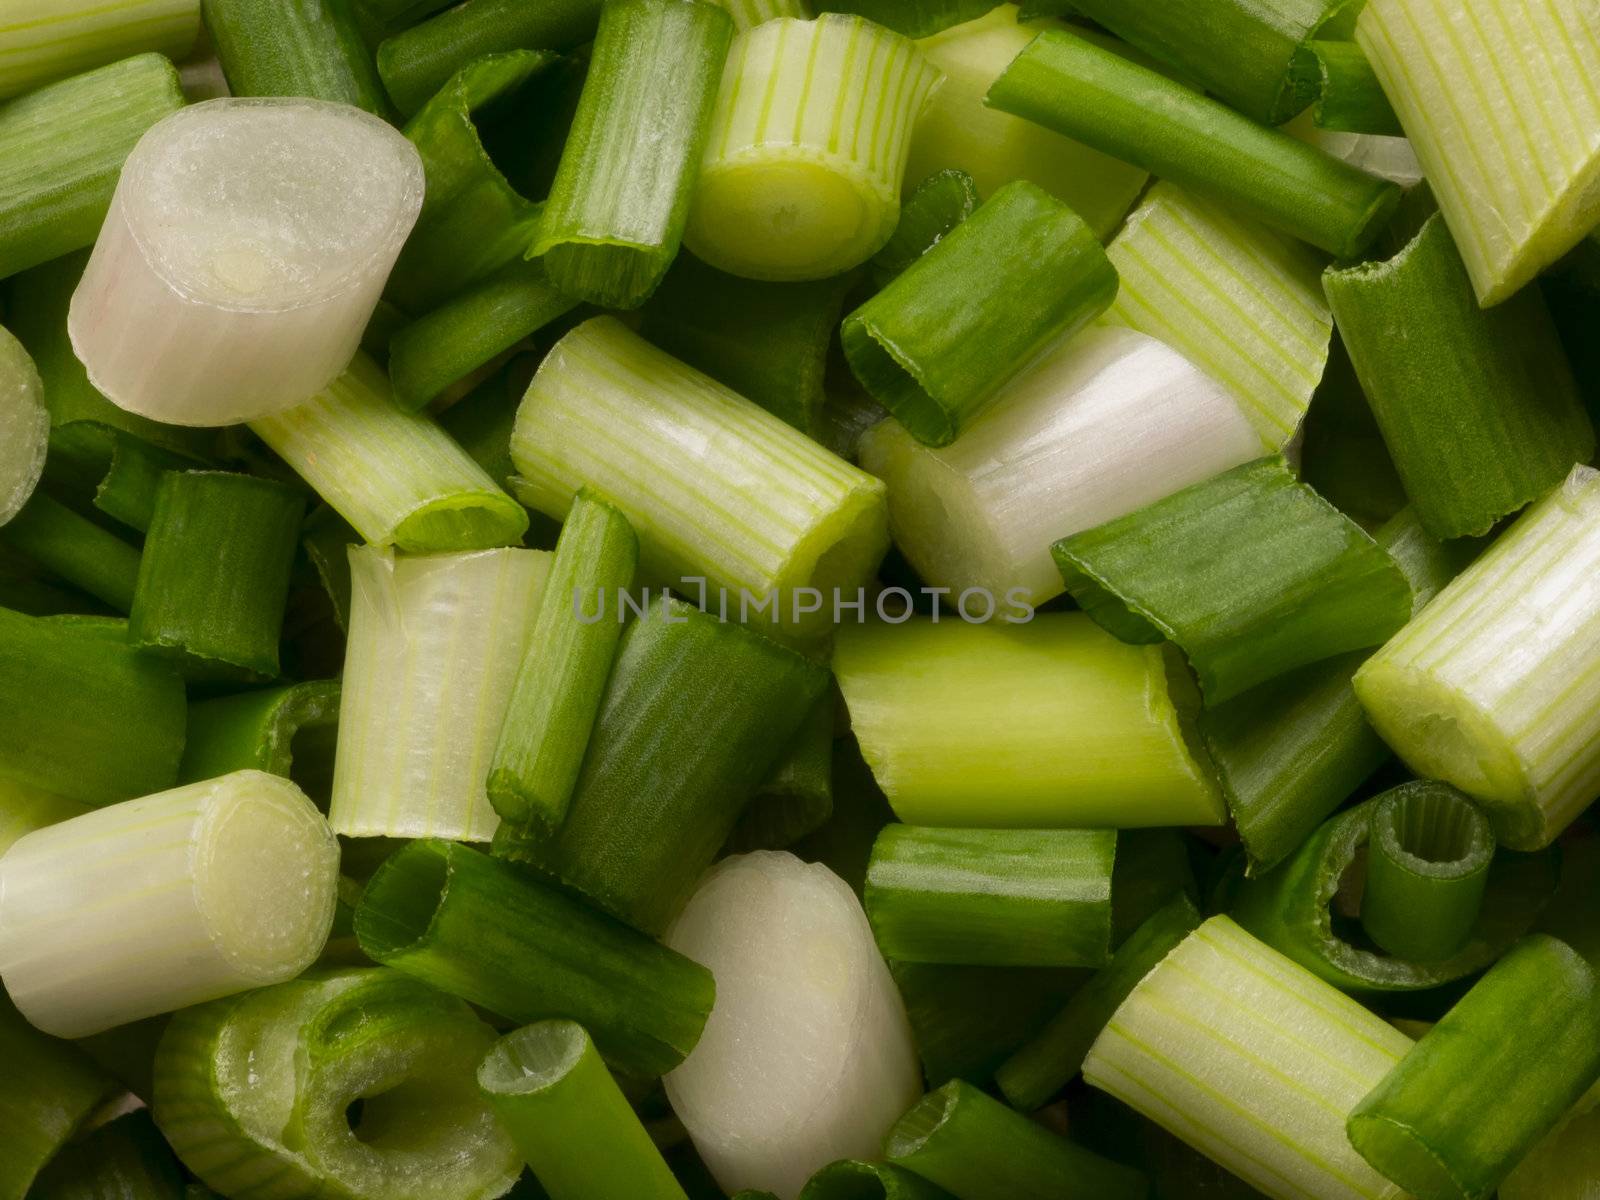 chopped green onions by zkruger